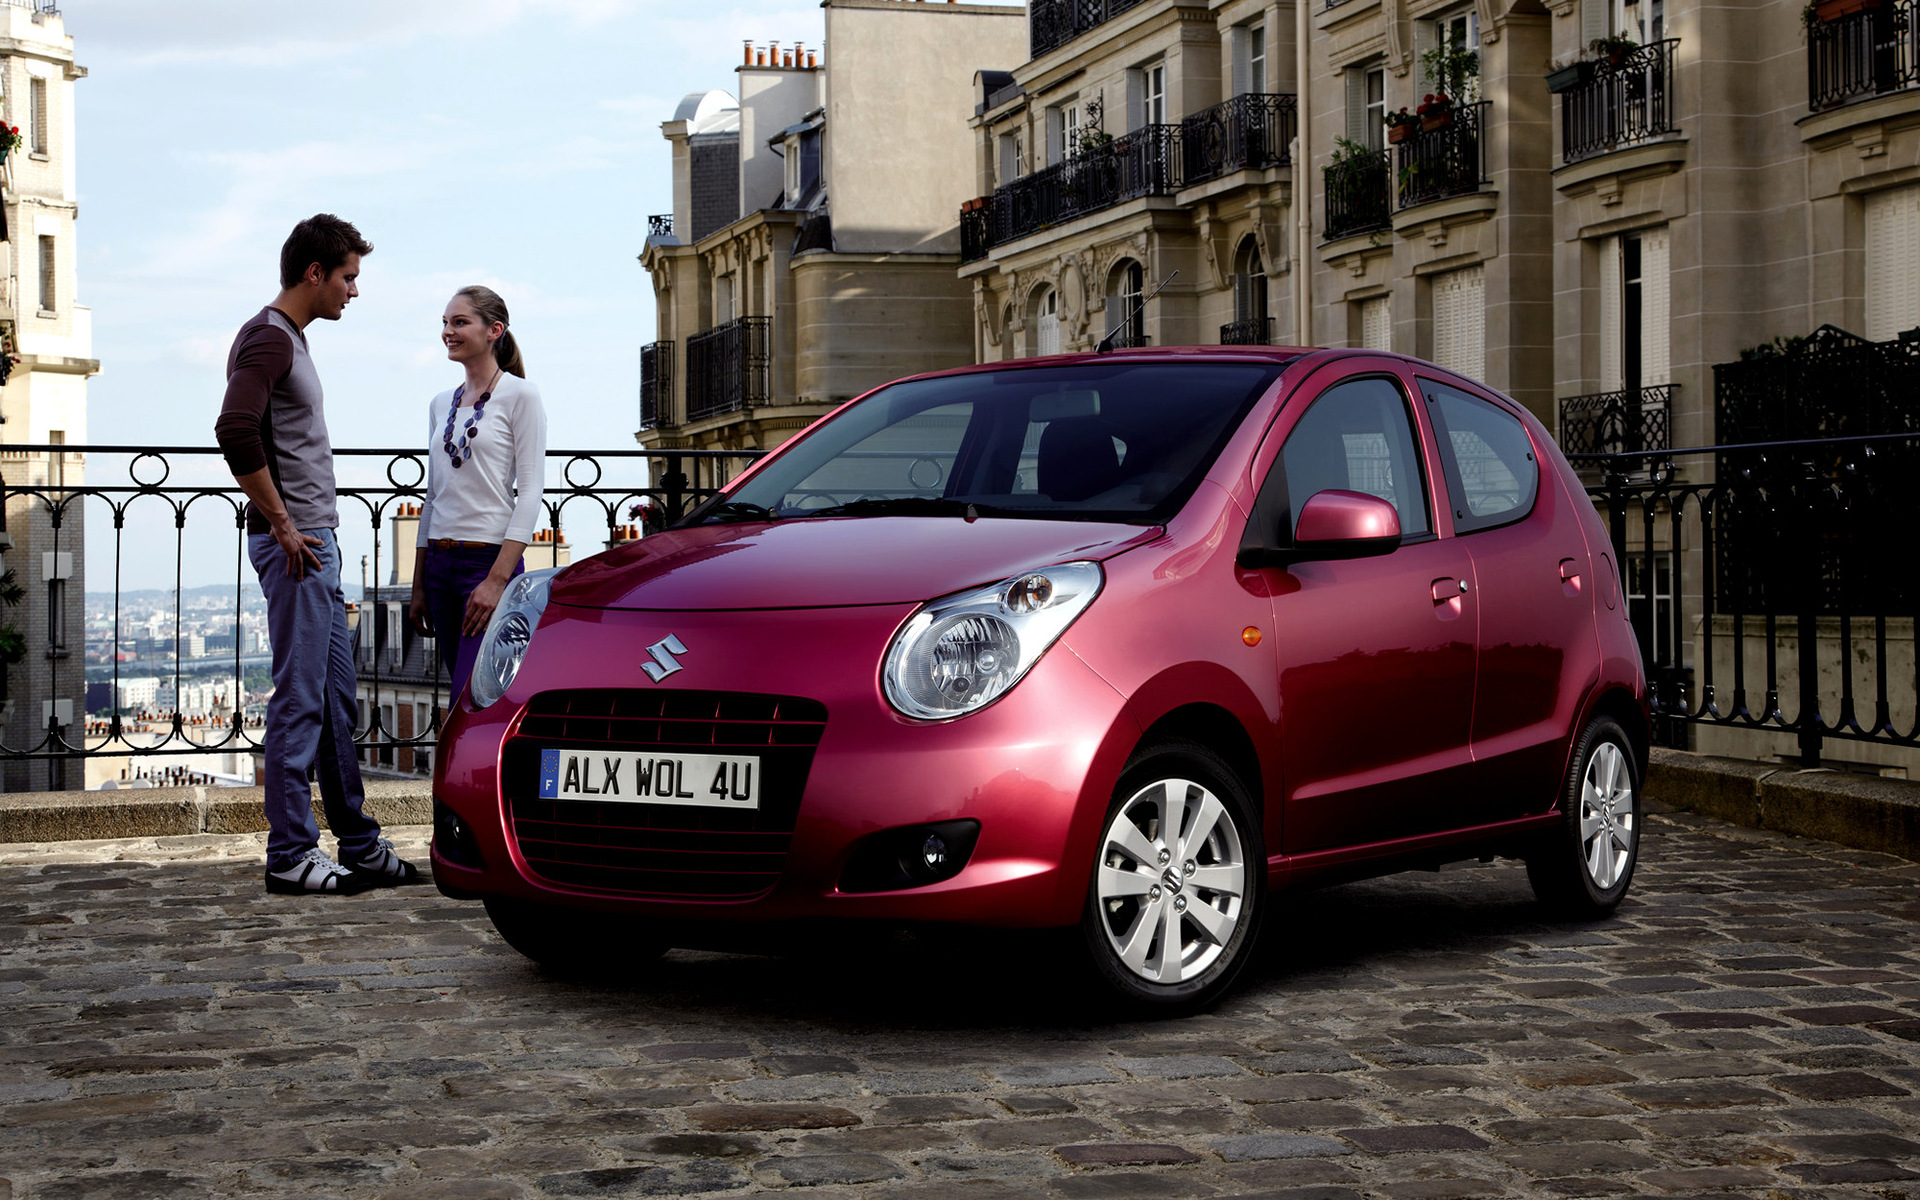 2008 Suzuki Alto   Wallpapers and HD Images Car Pixel 1920x1200